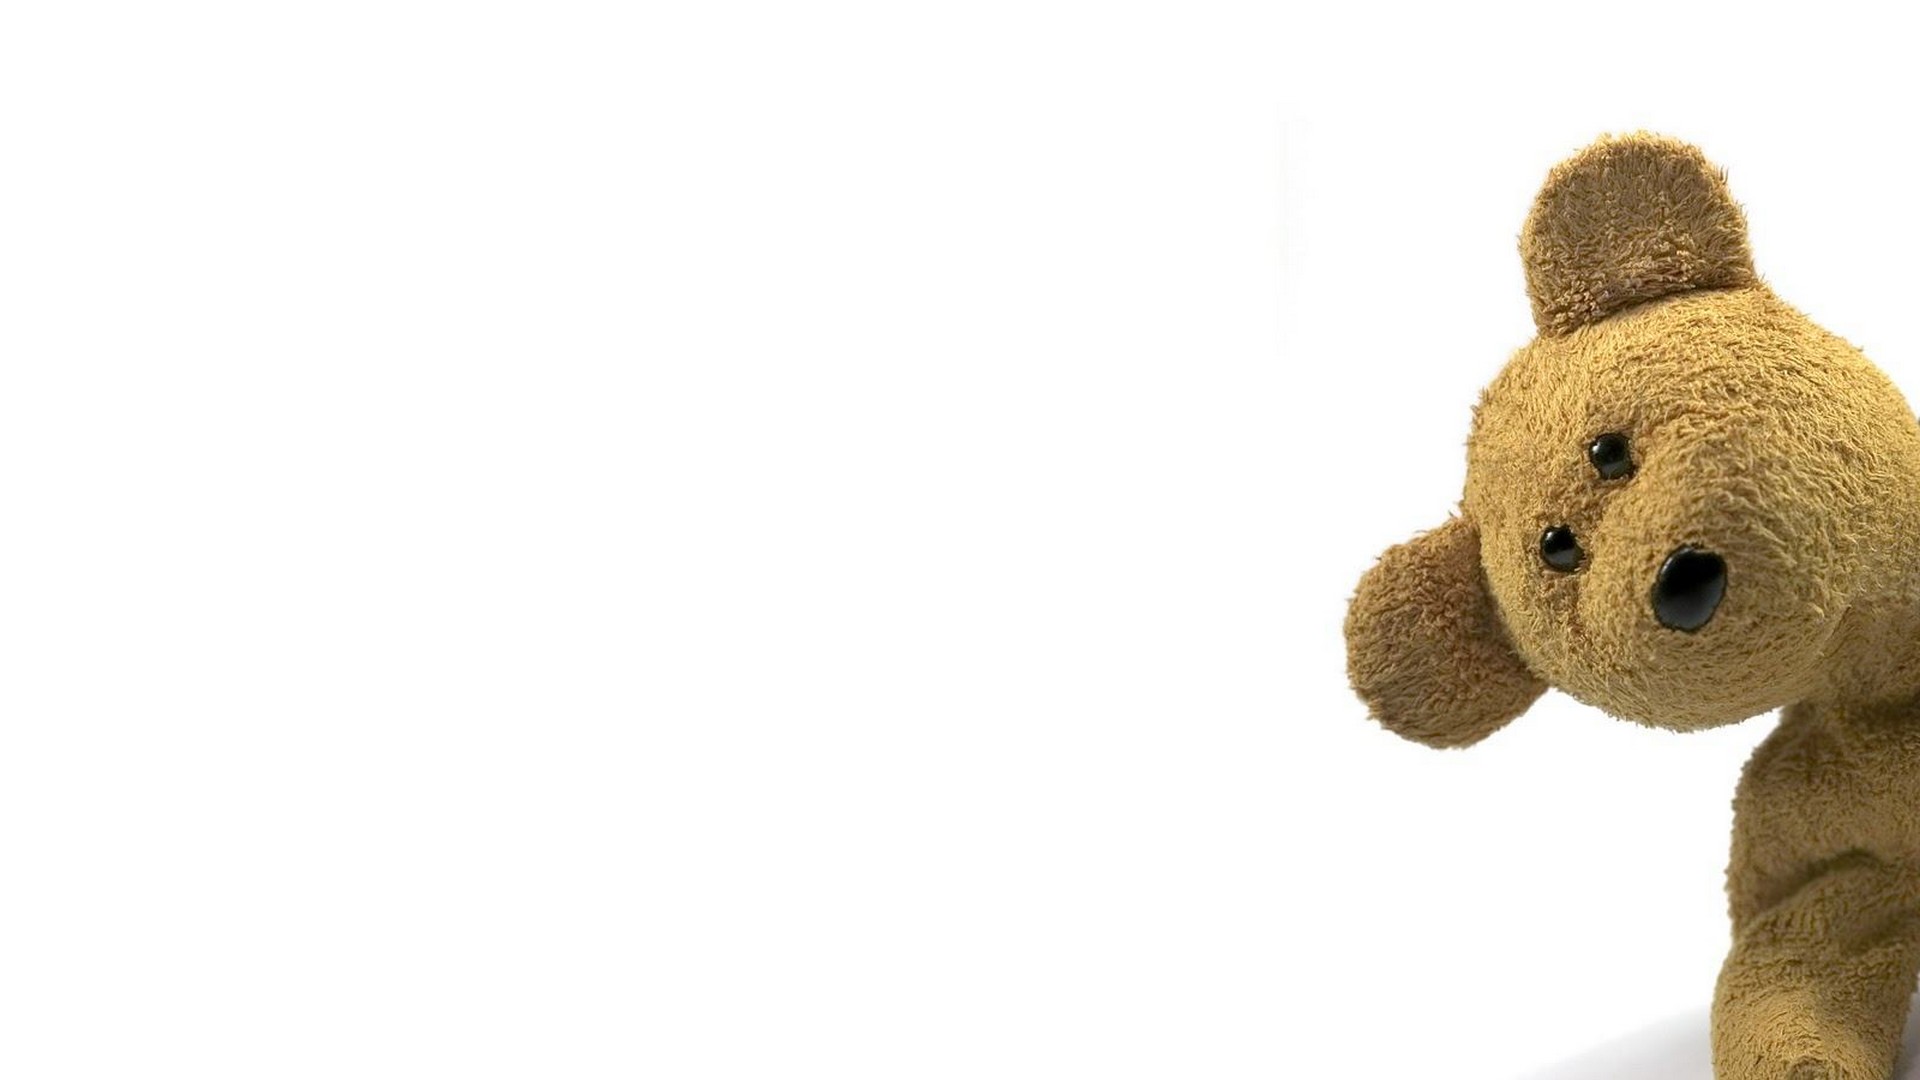 Big Teddy Bear Background Wallpaper HD With Resolution 1920X1080 pixel. You can make this wallpaper for your Desktop Computer Backgrounds, Mac Wallpapers, Android Lock screen or iPhone Screensavers